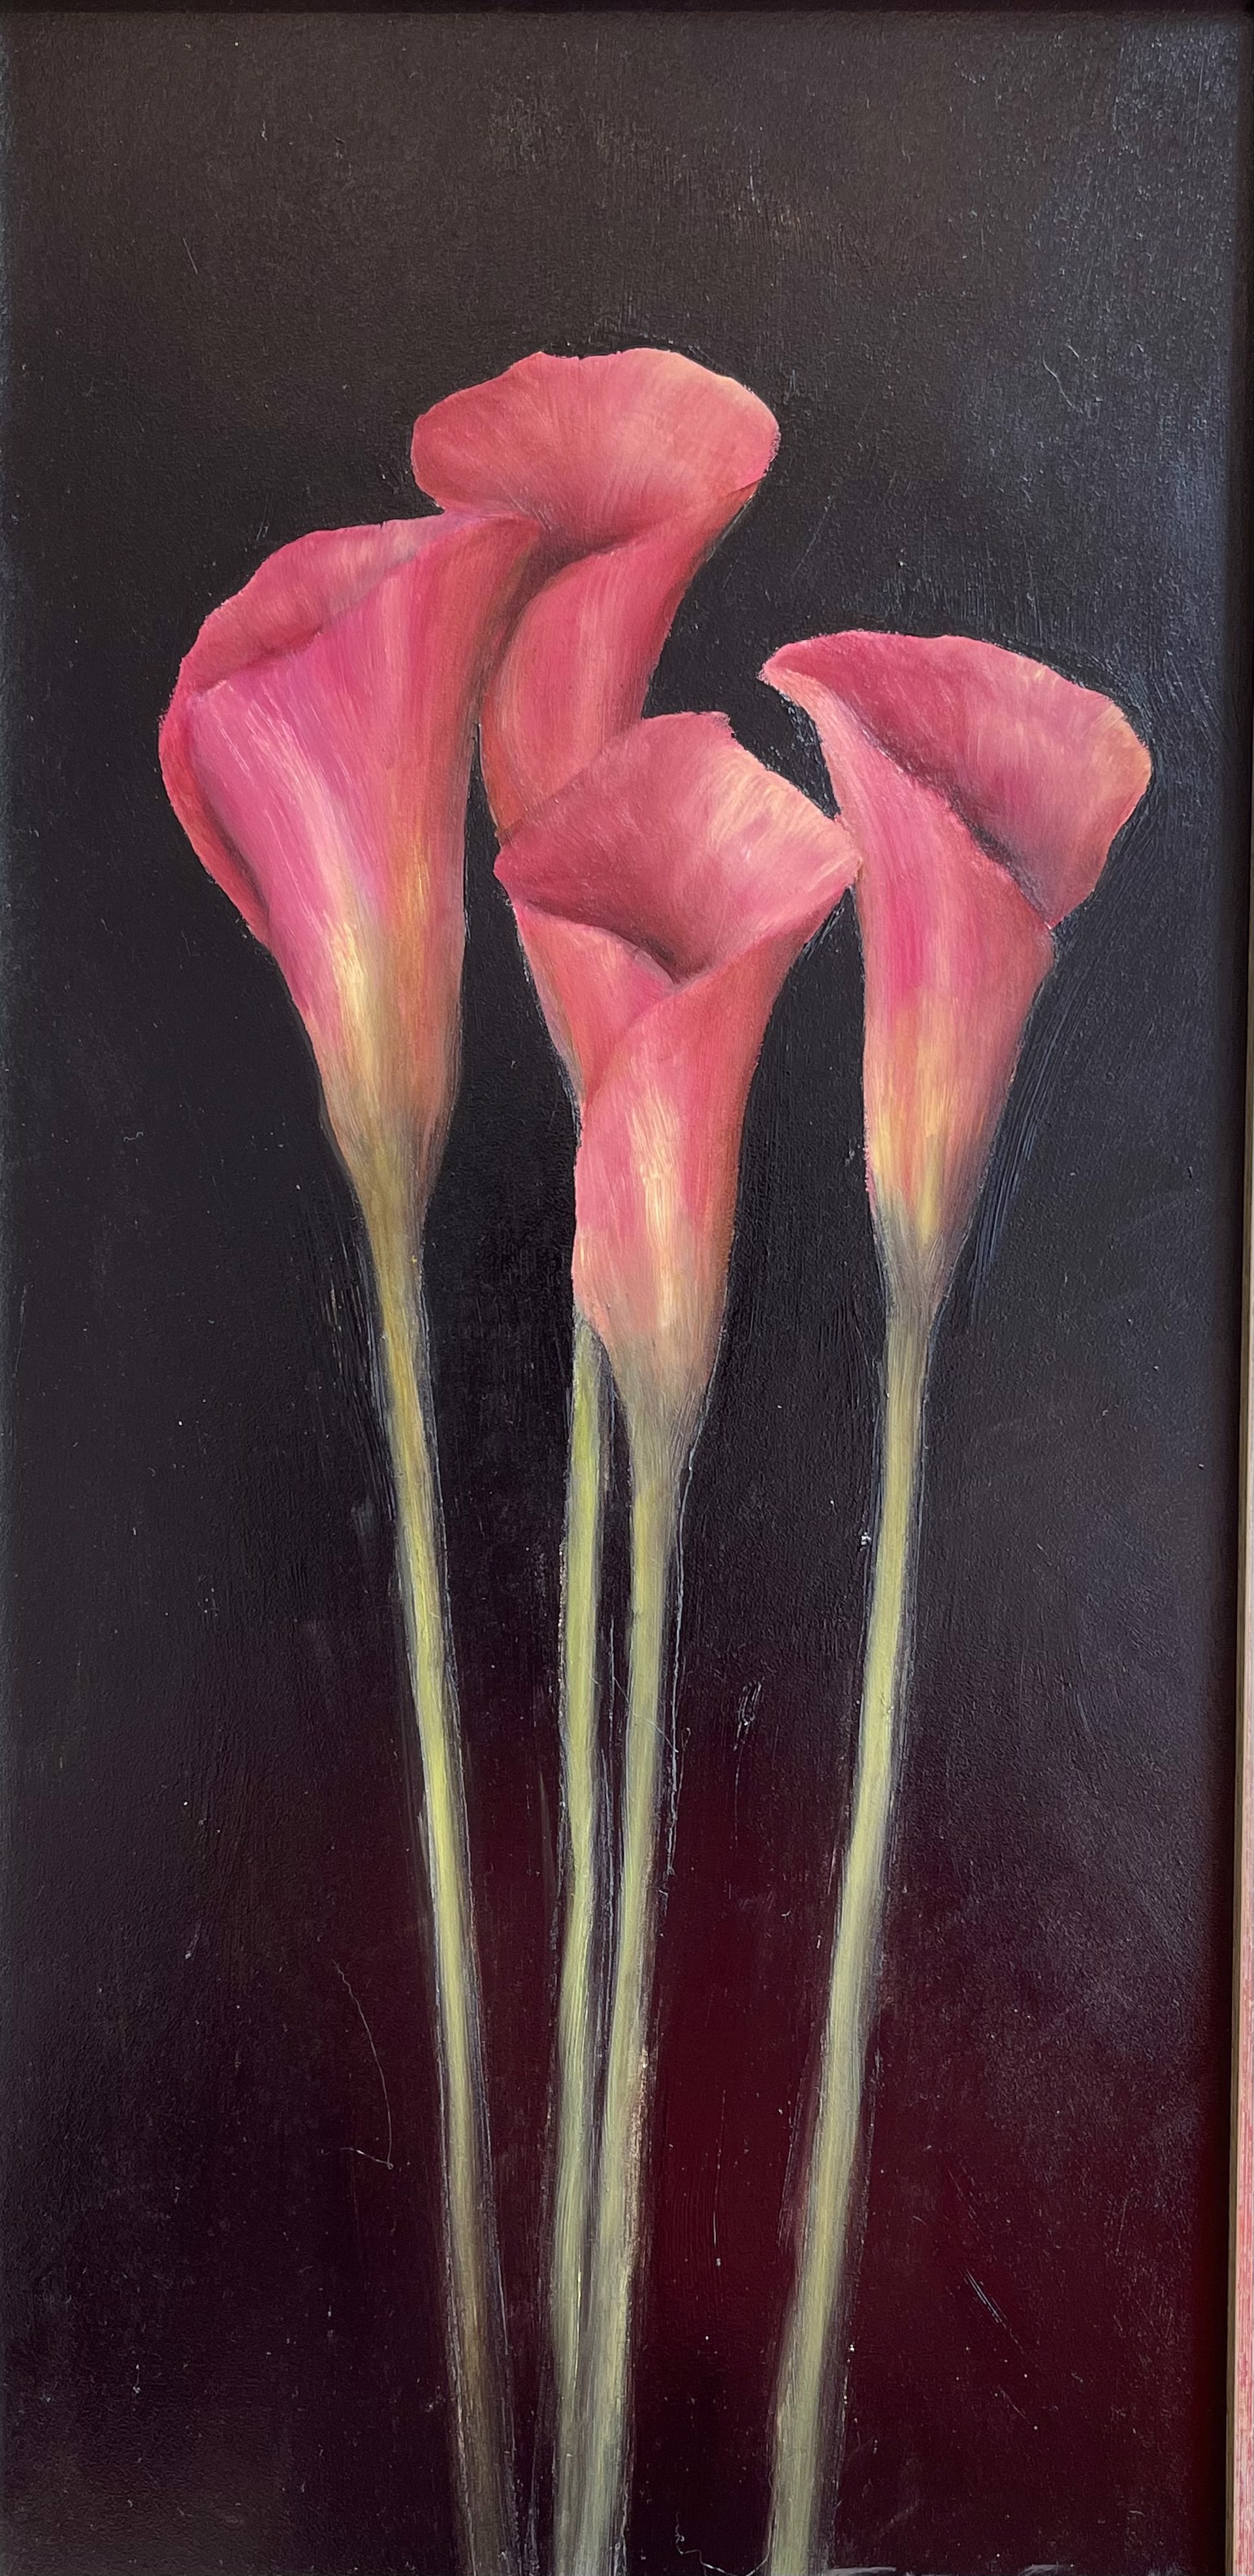 Calla Lilies by Gregory Smith